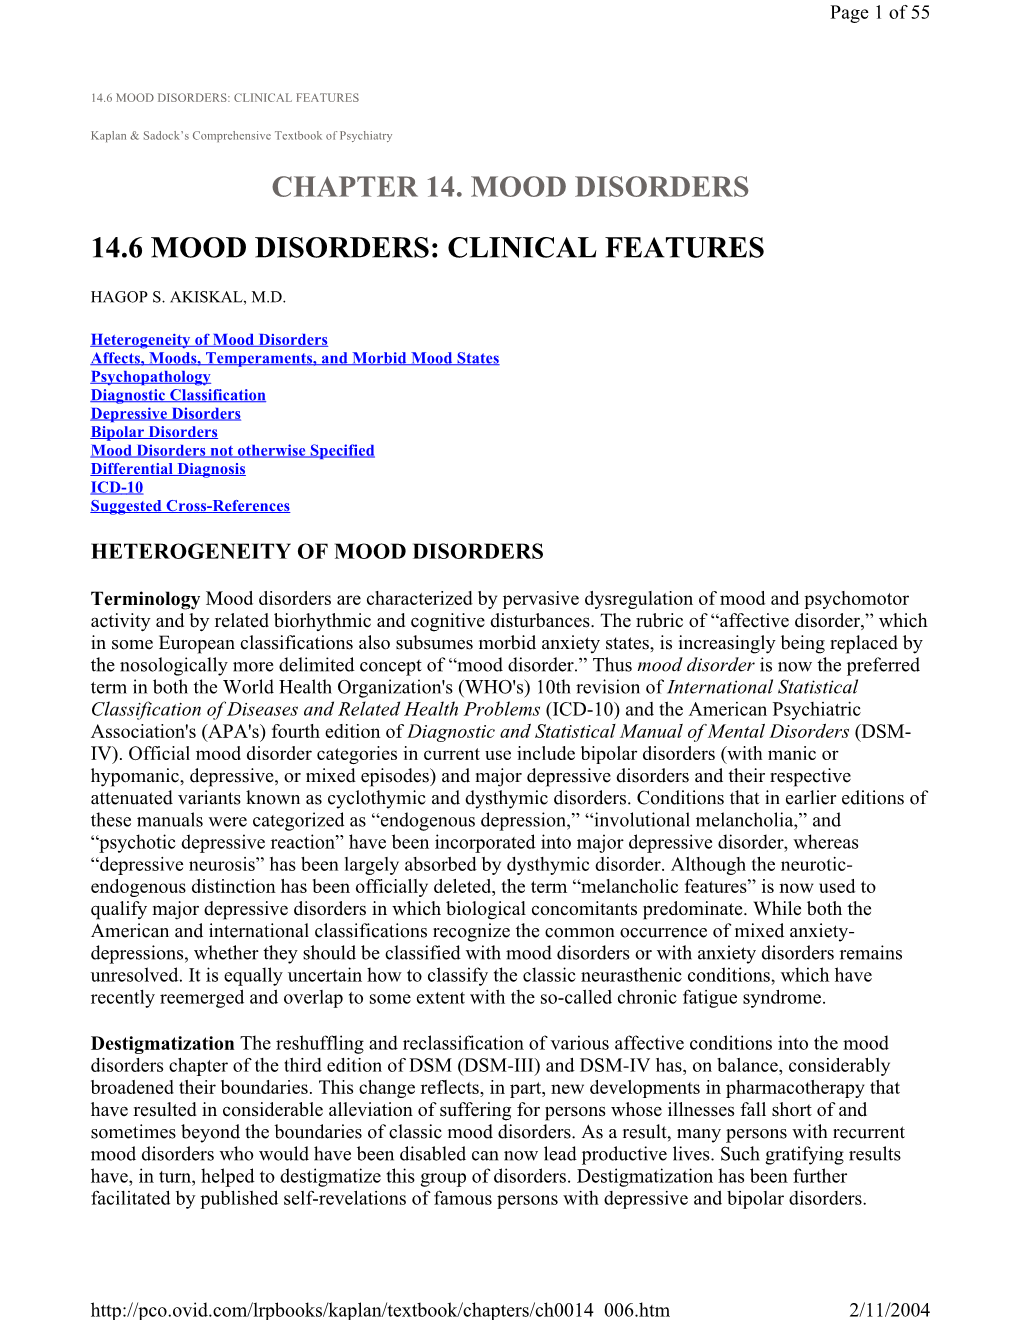 14.6 Mood Disorders: Clinical Features Chapter 14. Mood